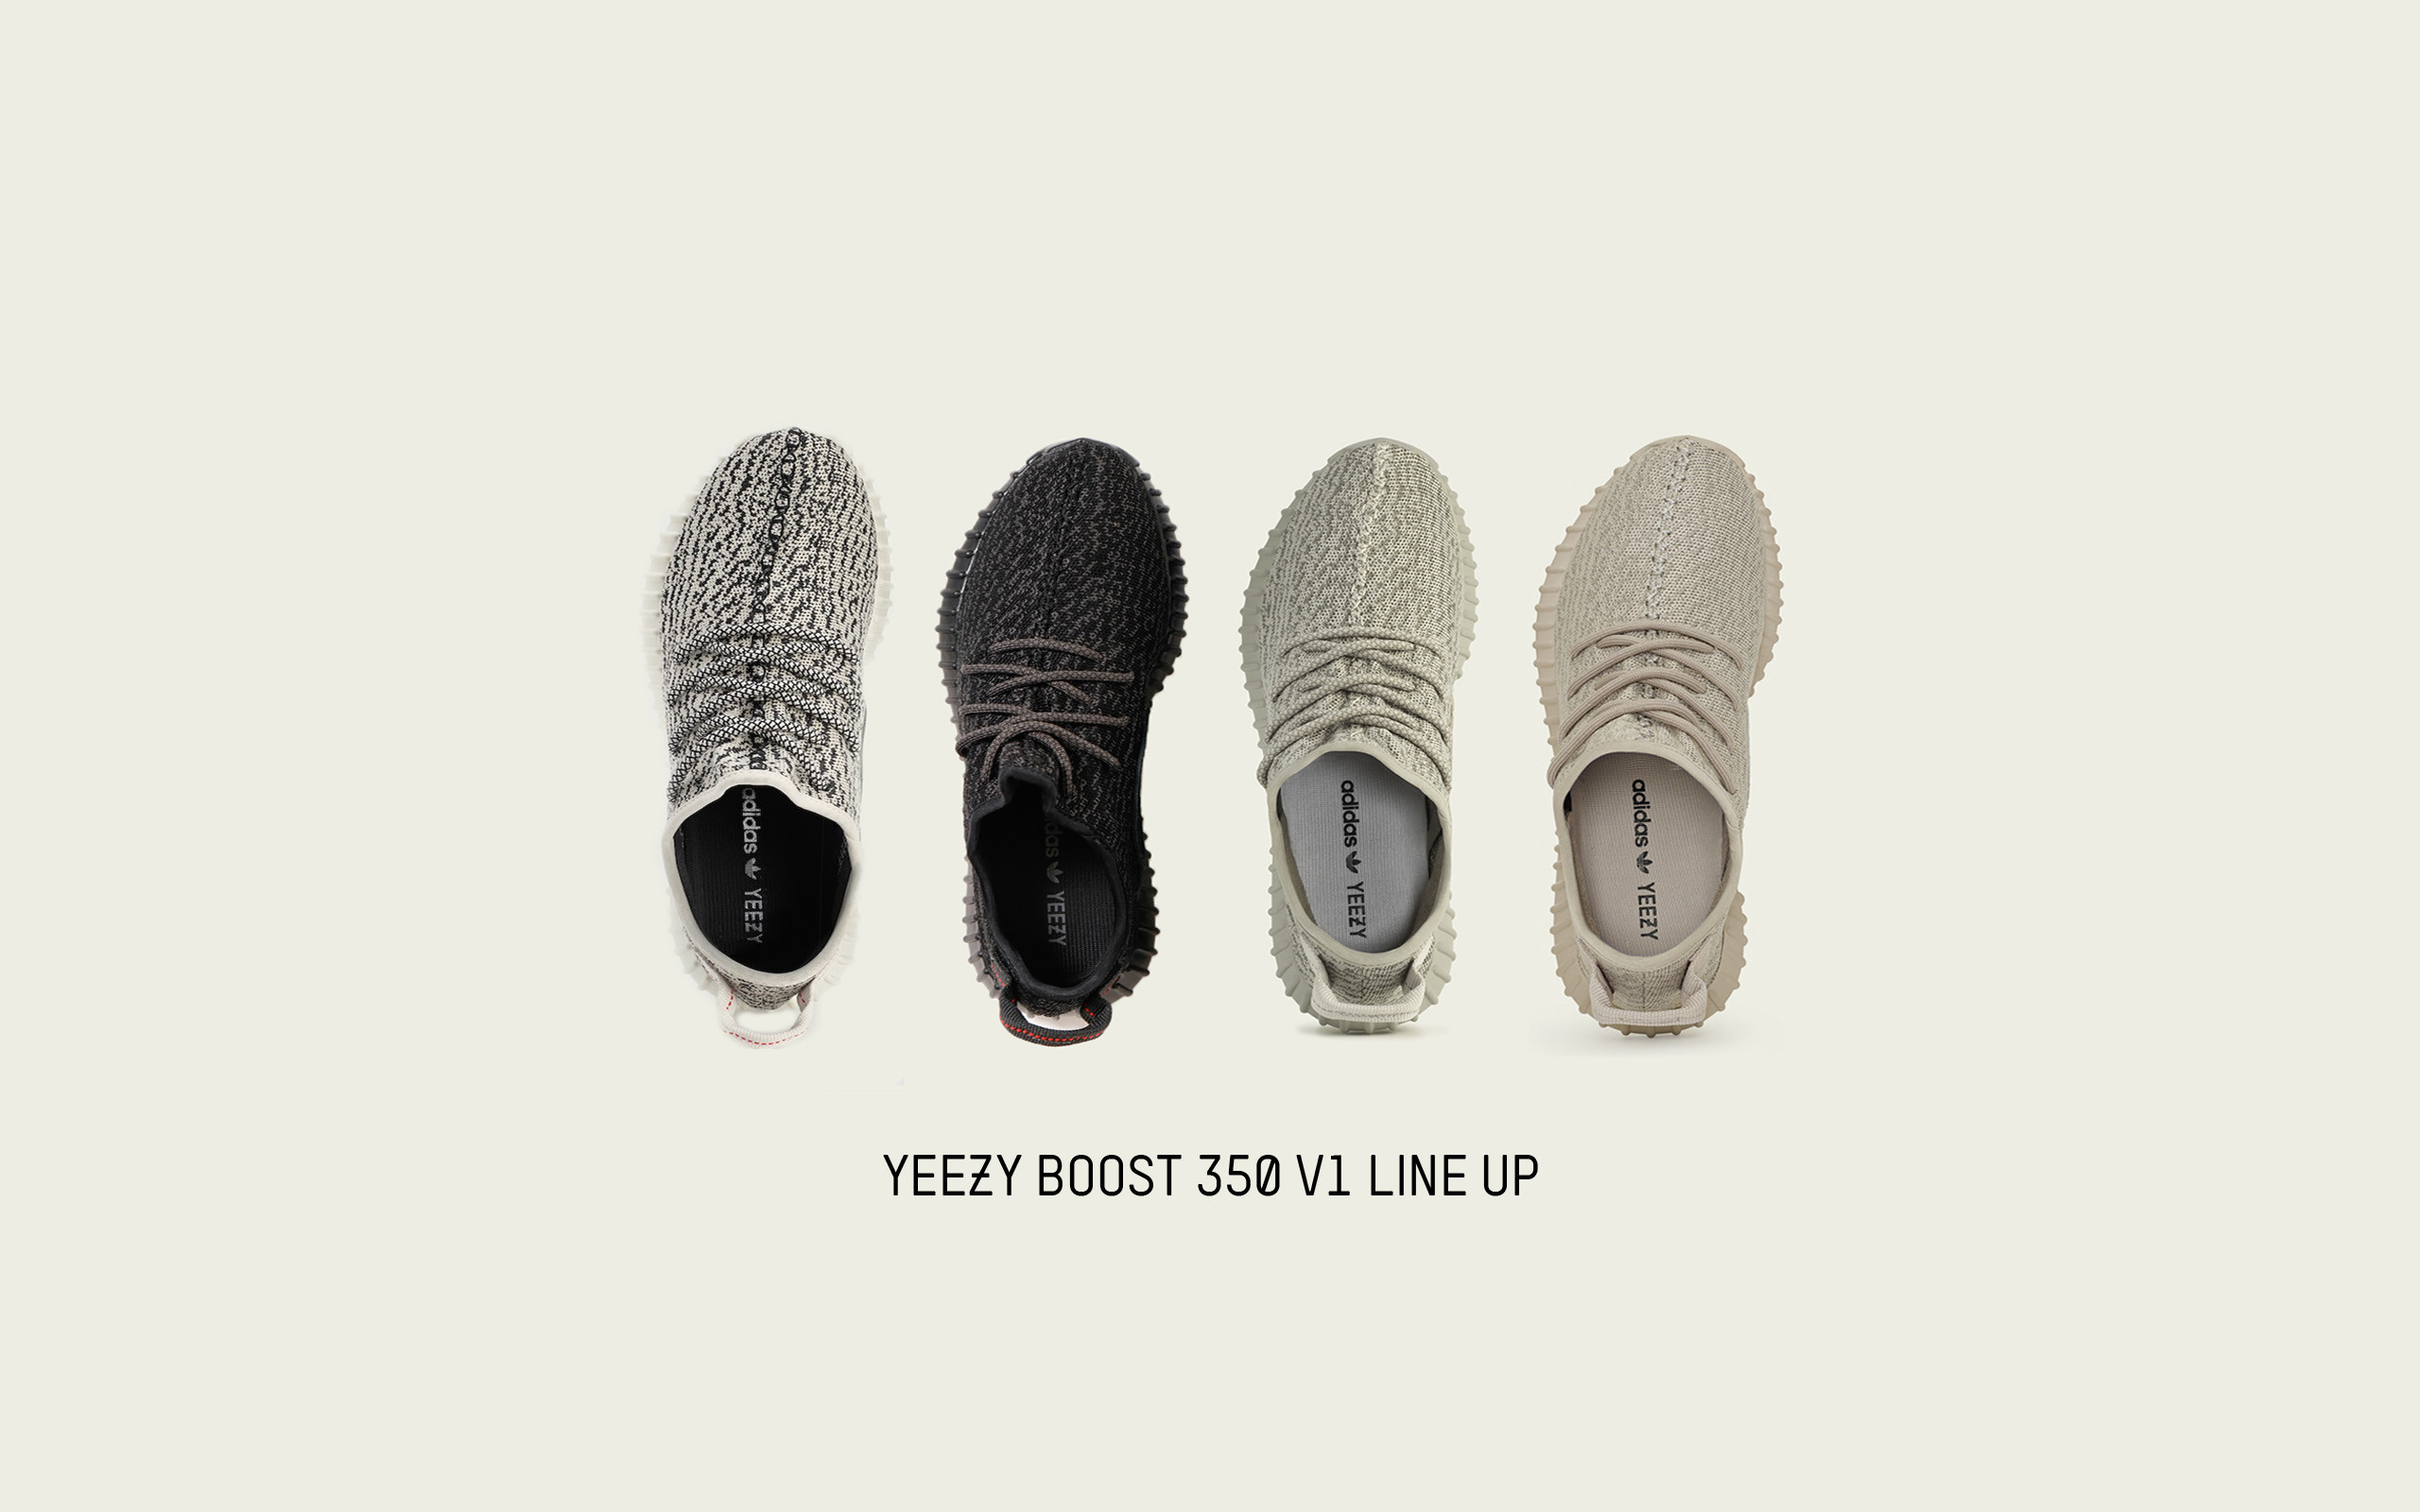 2560x1600 Yeezy Boost 350 V1 Line Up Wallpapers